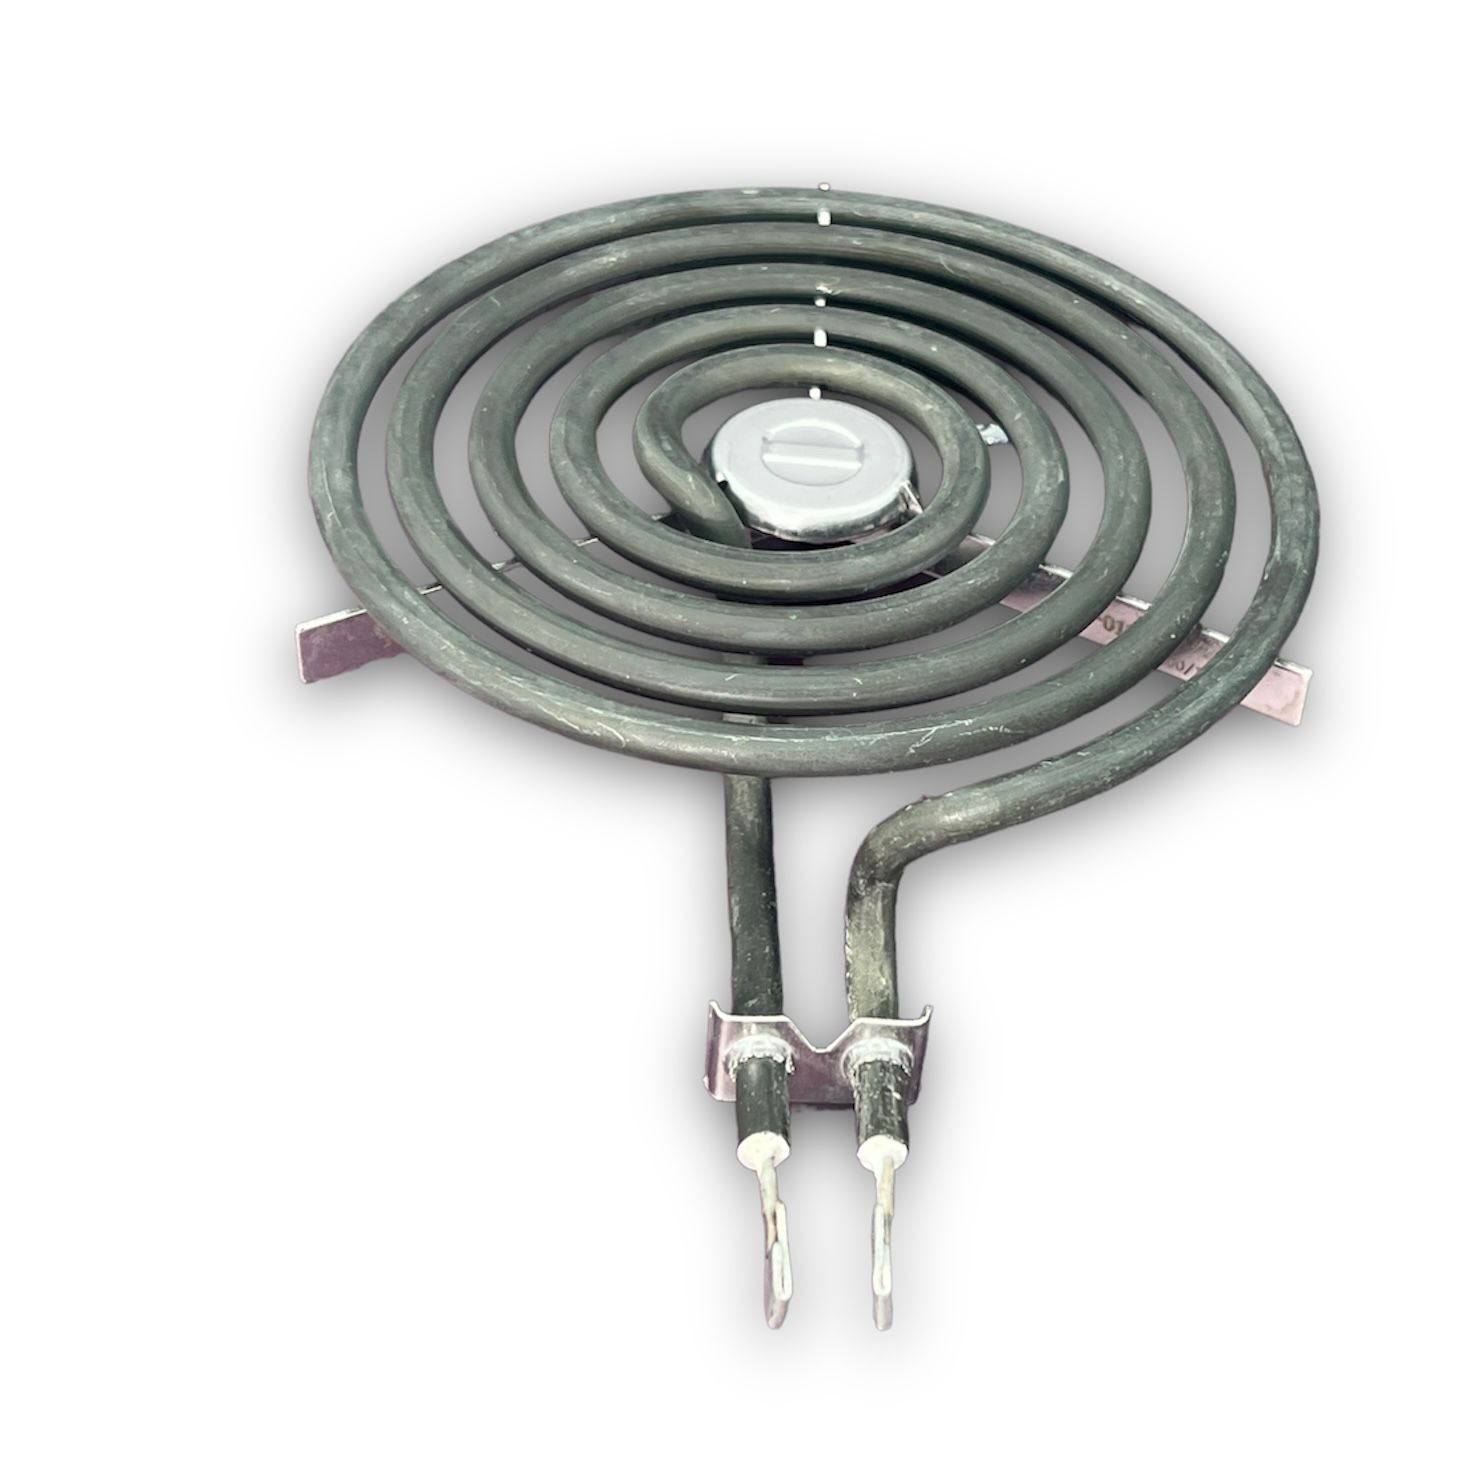 GE Range Coil Surface Burner 6"- WB30X0256,  Replaces: WB30X256  WB30X0247 WB30X0252 WB30X10013 WB30X10015 WB30X5079 INVERTEC